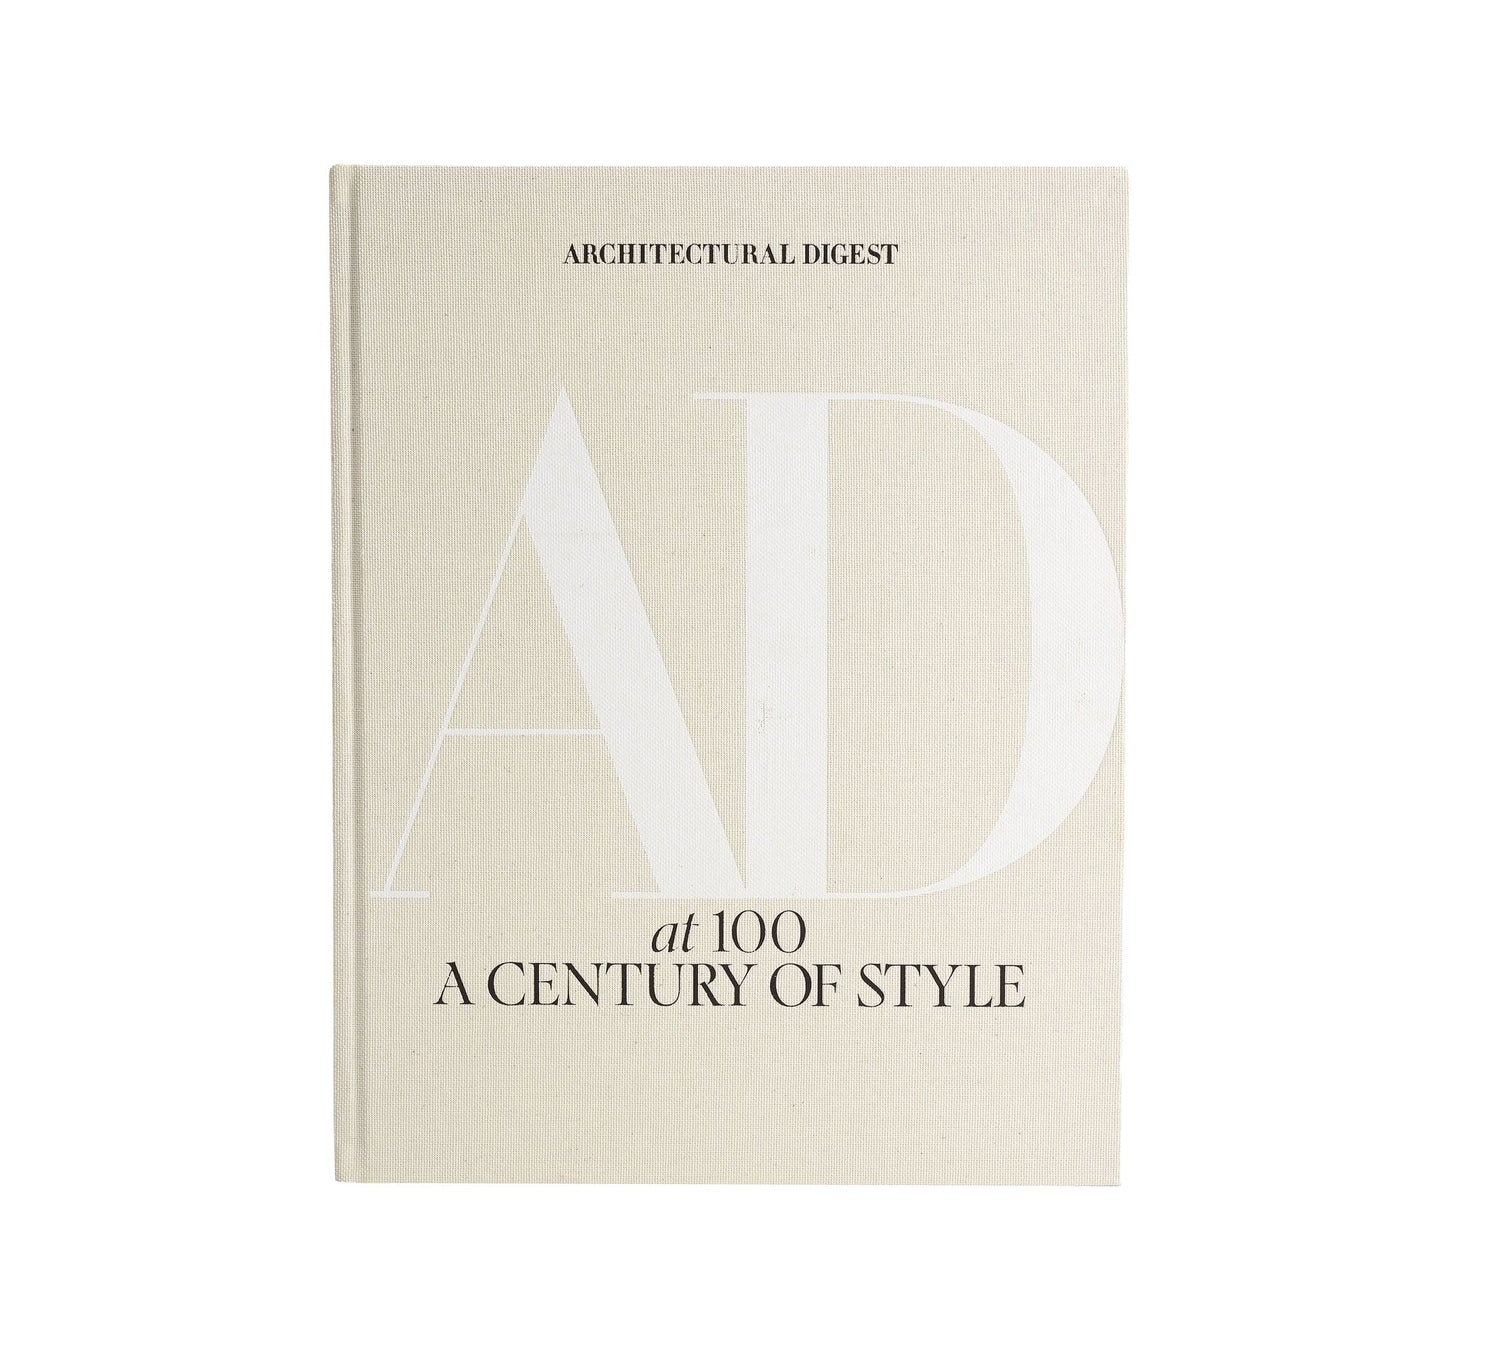 Custom Architectural Digest at 100 (A Century of Style)